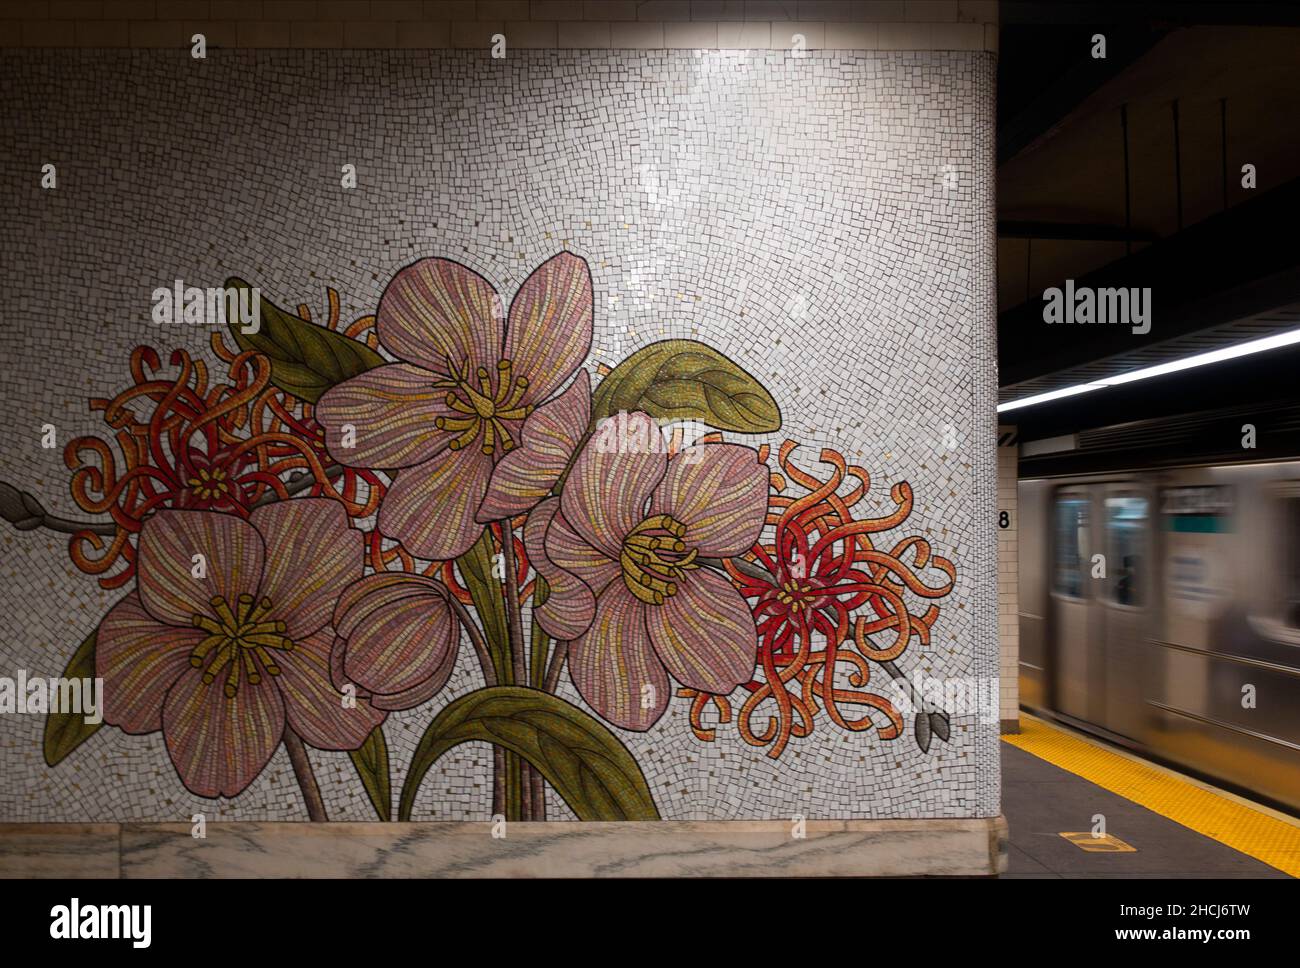 flower mosaic tiles at the 28th street subway station on the eastside of Manhattan NYC Stock Photo